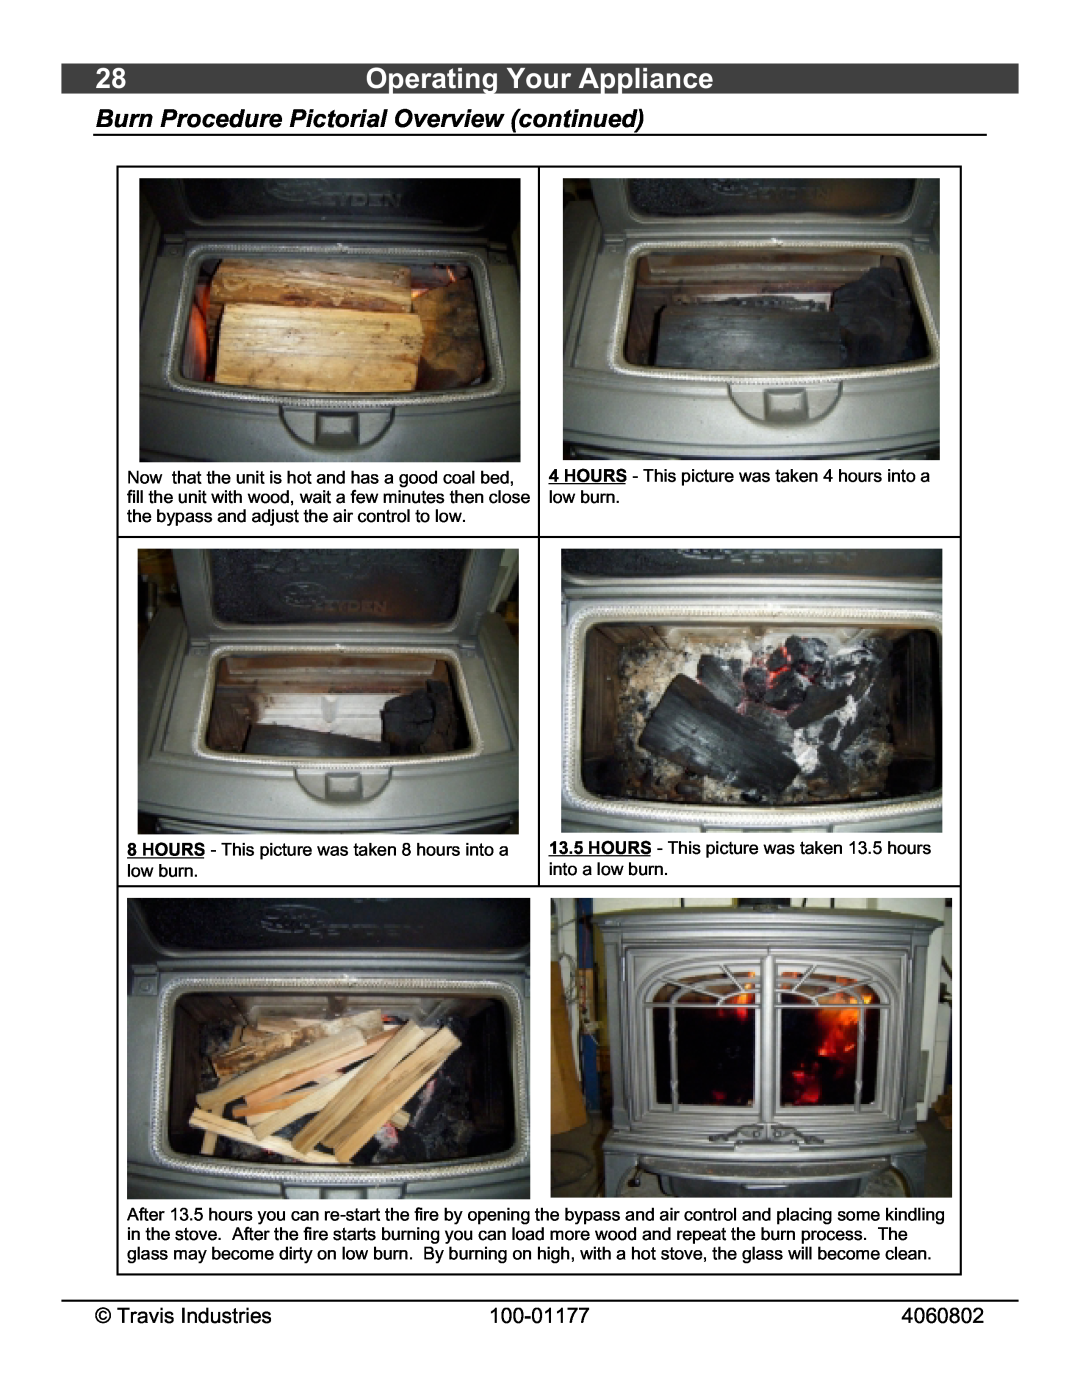 Lopi 028-S-75-2 owner manual Operating Your Appliance, Burn Procedure Pictorial Overview continued 